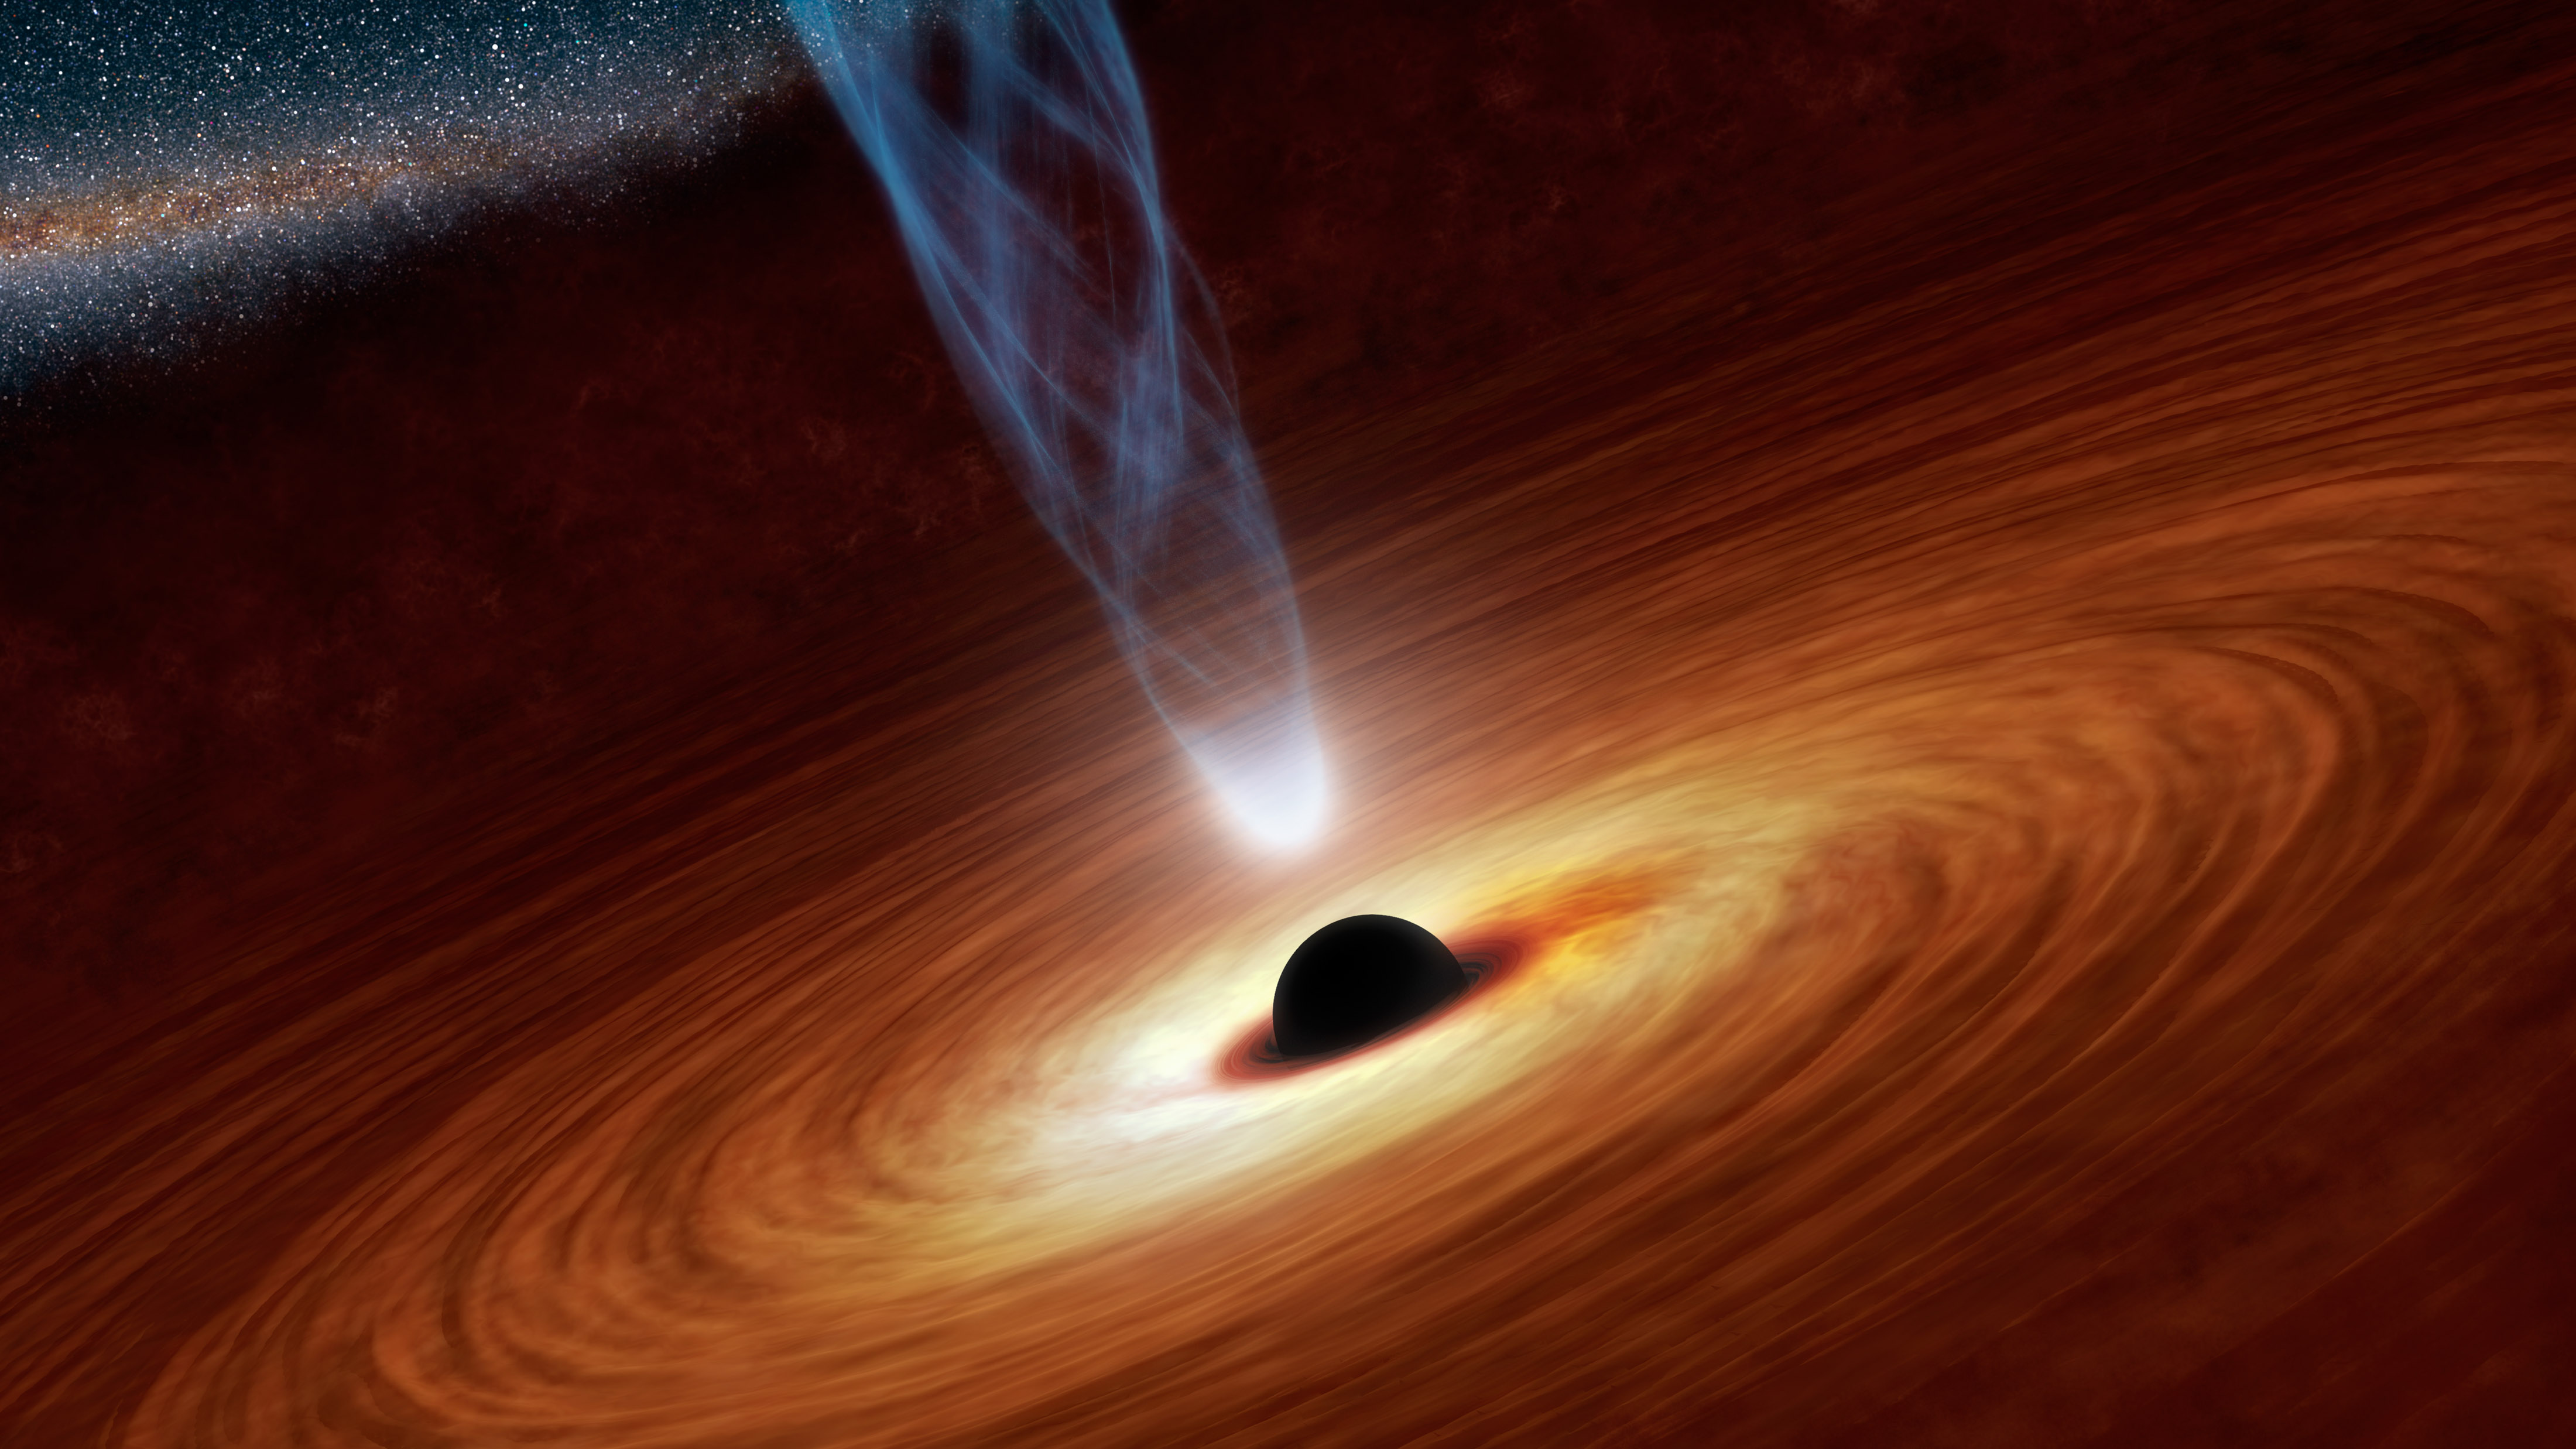 In just one month, astronomers detected gravitational waves from black hole mergers, neutron stars colliding, and one star swallowed by a black hole